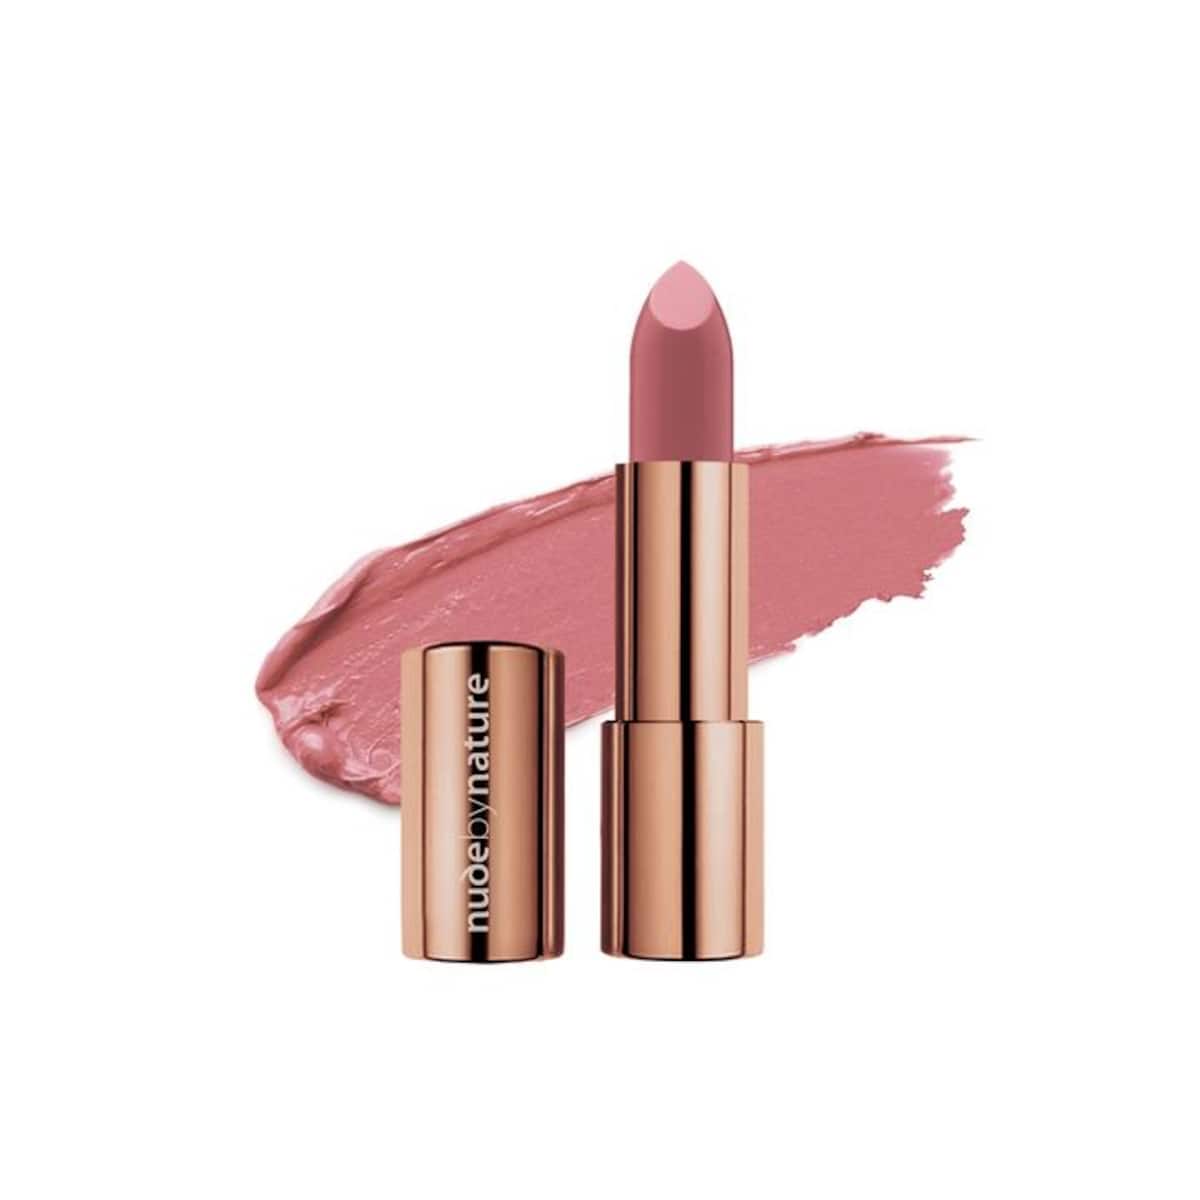 Nude by Nature Moisture Shine Lipstick 03 Dusty Rose